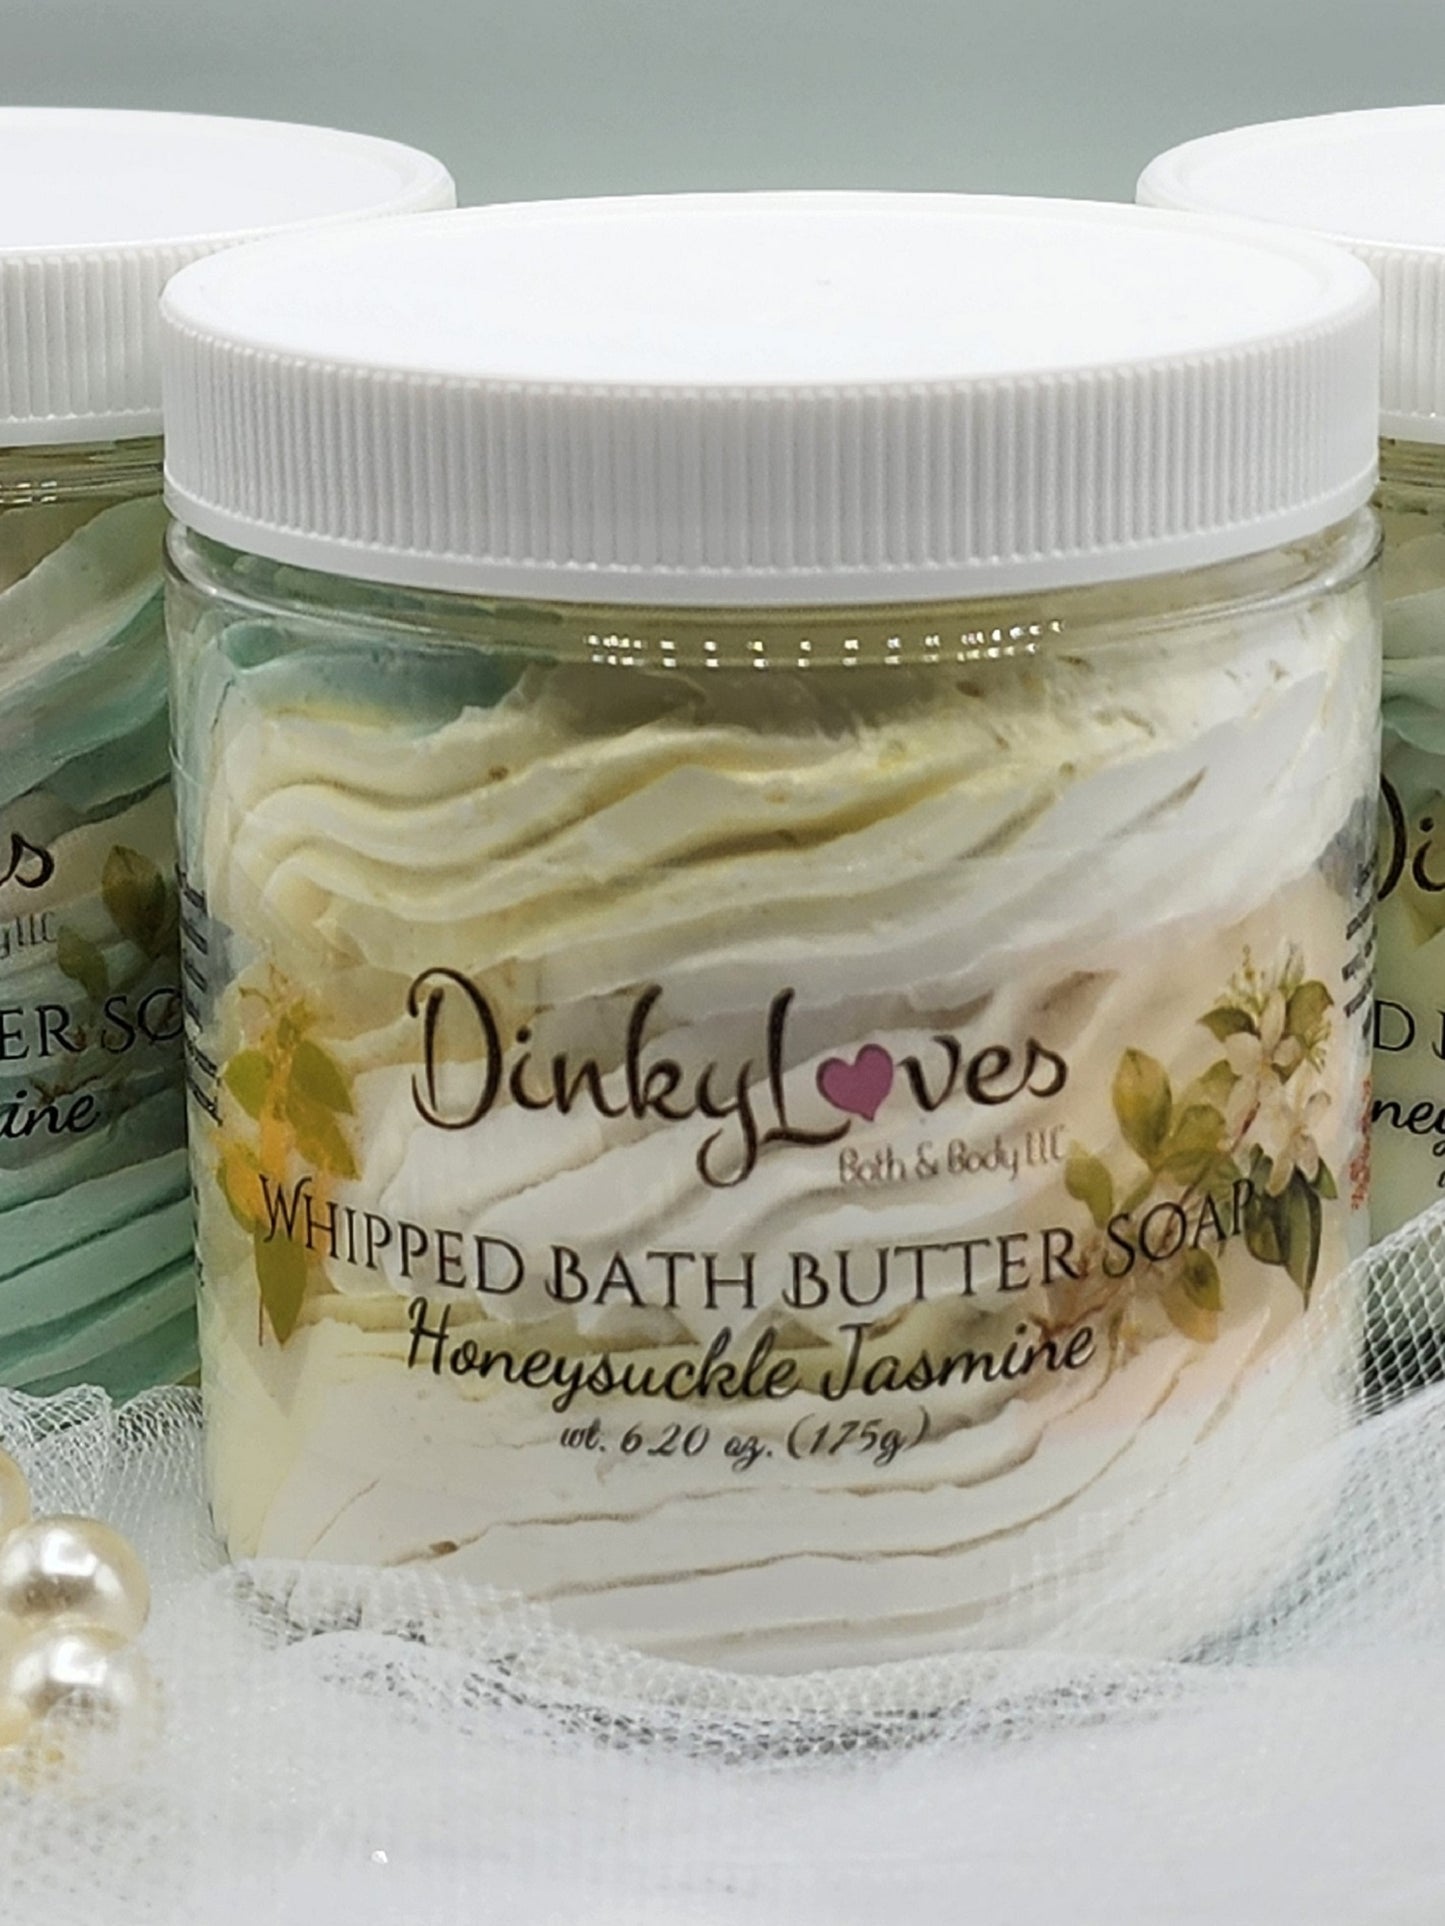 HONEYSUCKLE JASMINE Whipped Bath Butter Soap / Gift Idea / Luxury Product / Cocoa Butter